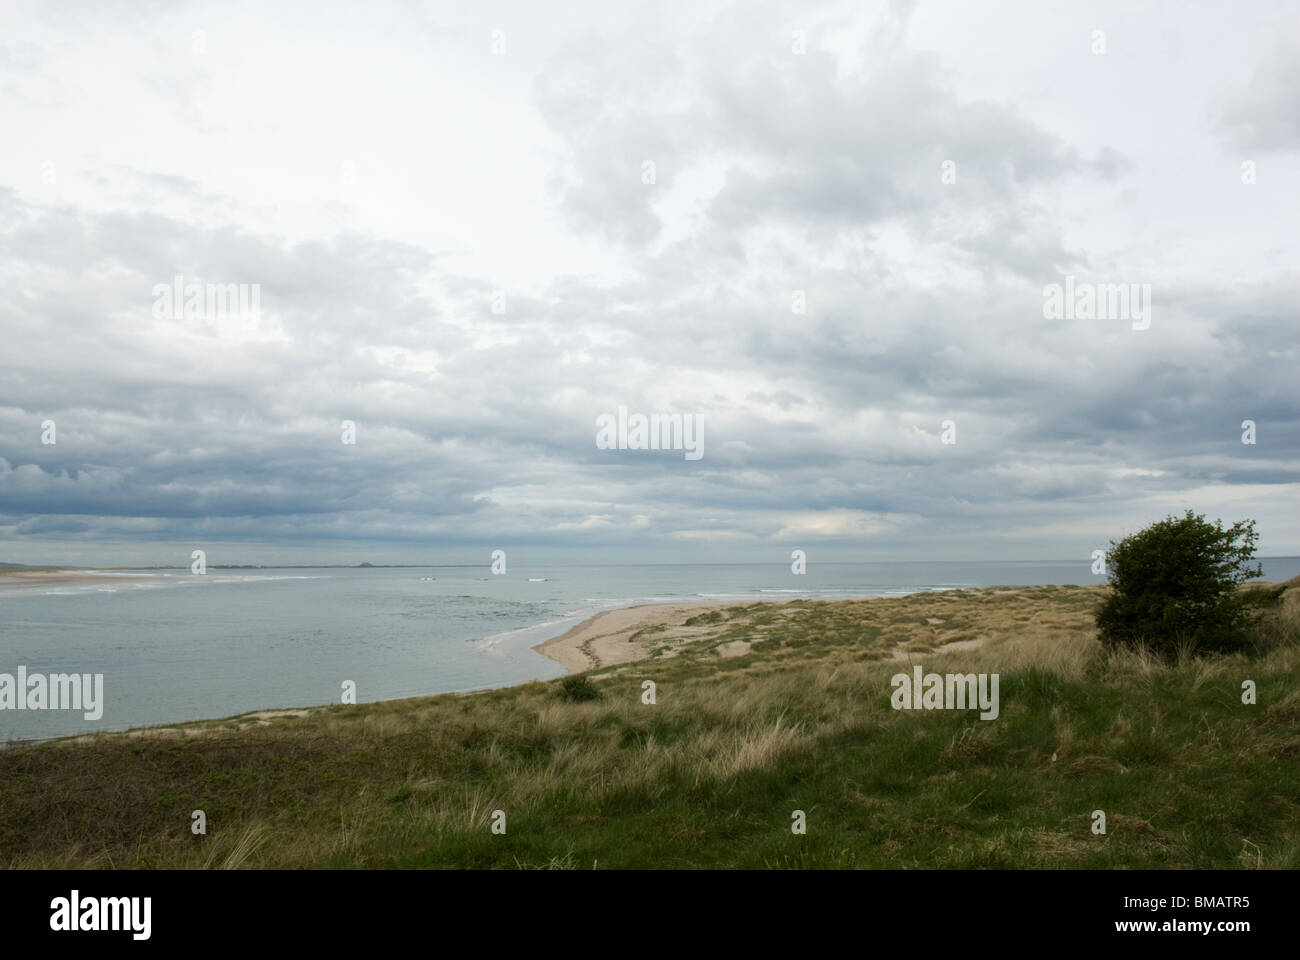 Budle Bay Beach, Northumberland, Angleterre. Banque D'Images